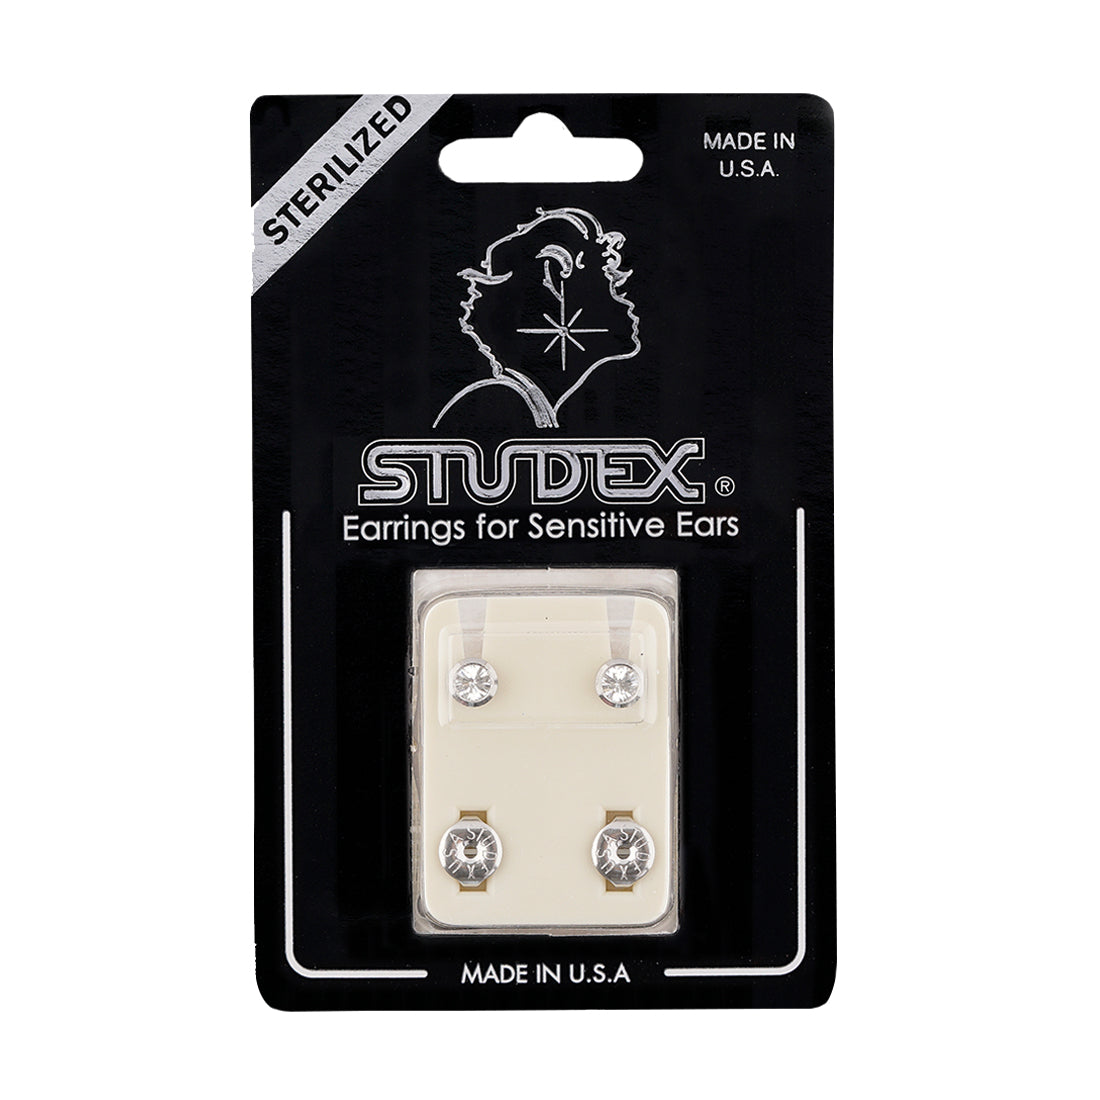 4MM April – Crystal Bezel Allergy free Stainless Steel Ear Studs | Ideal for everyday wear